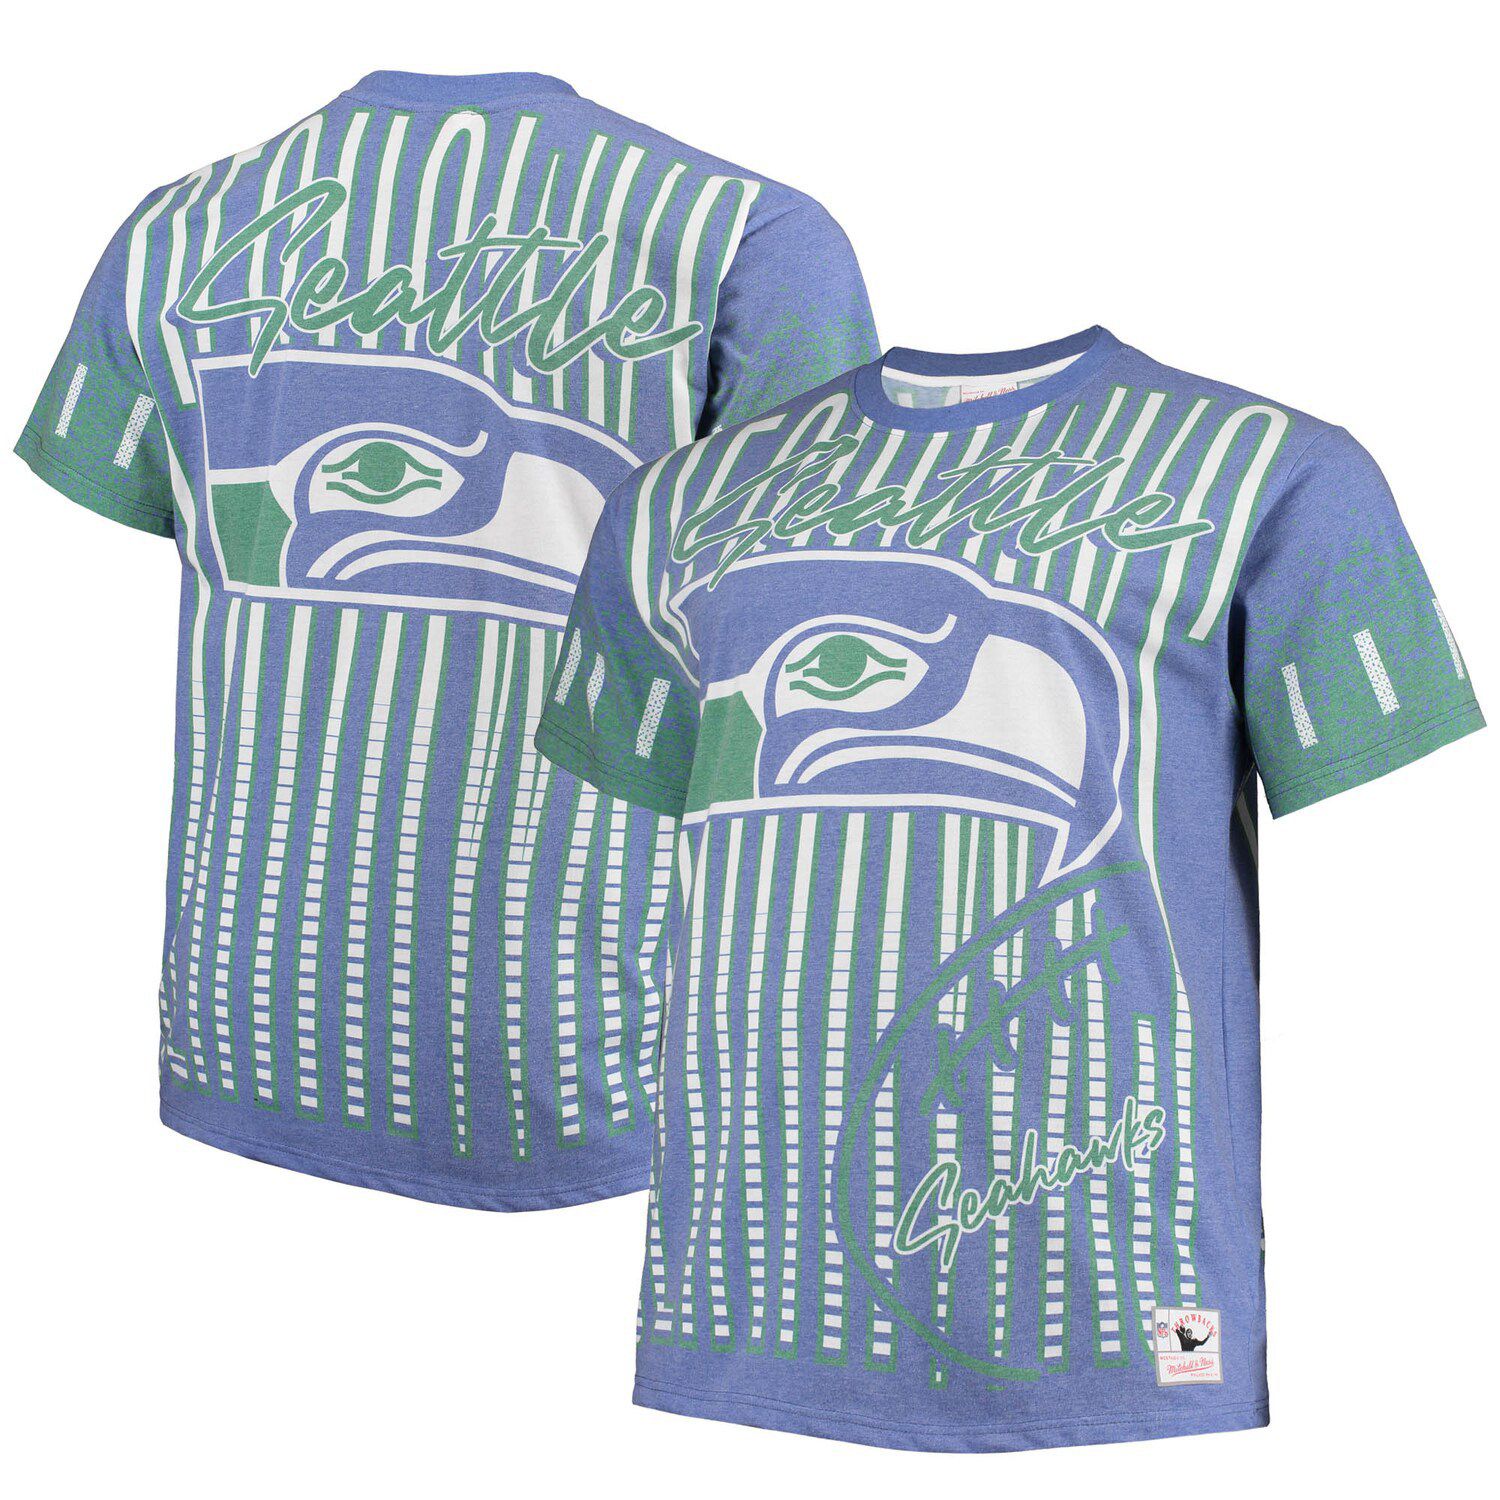 Image for Unbranded Men's Mitchell & Ness Royal Seattle Seahawks Jumbotron Big & Tall T-Shirt at Kohl's.